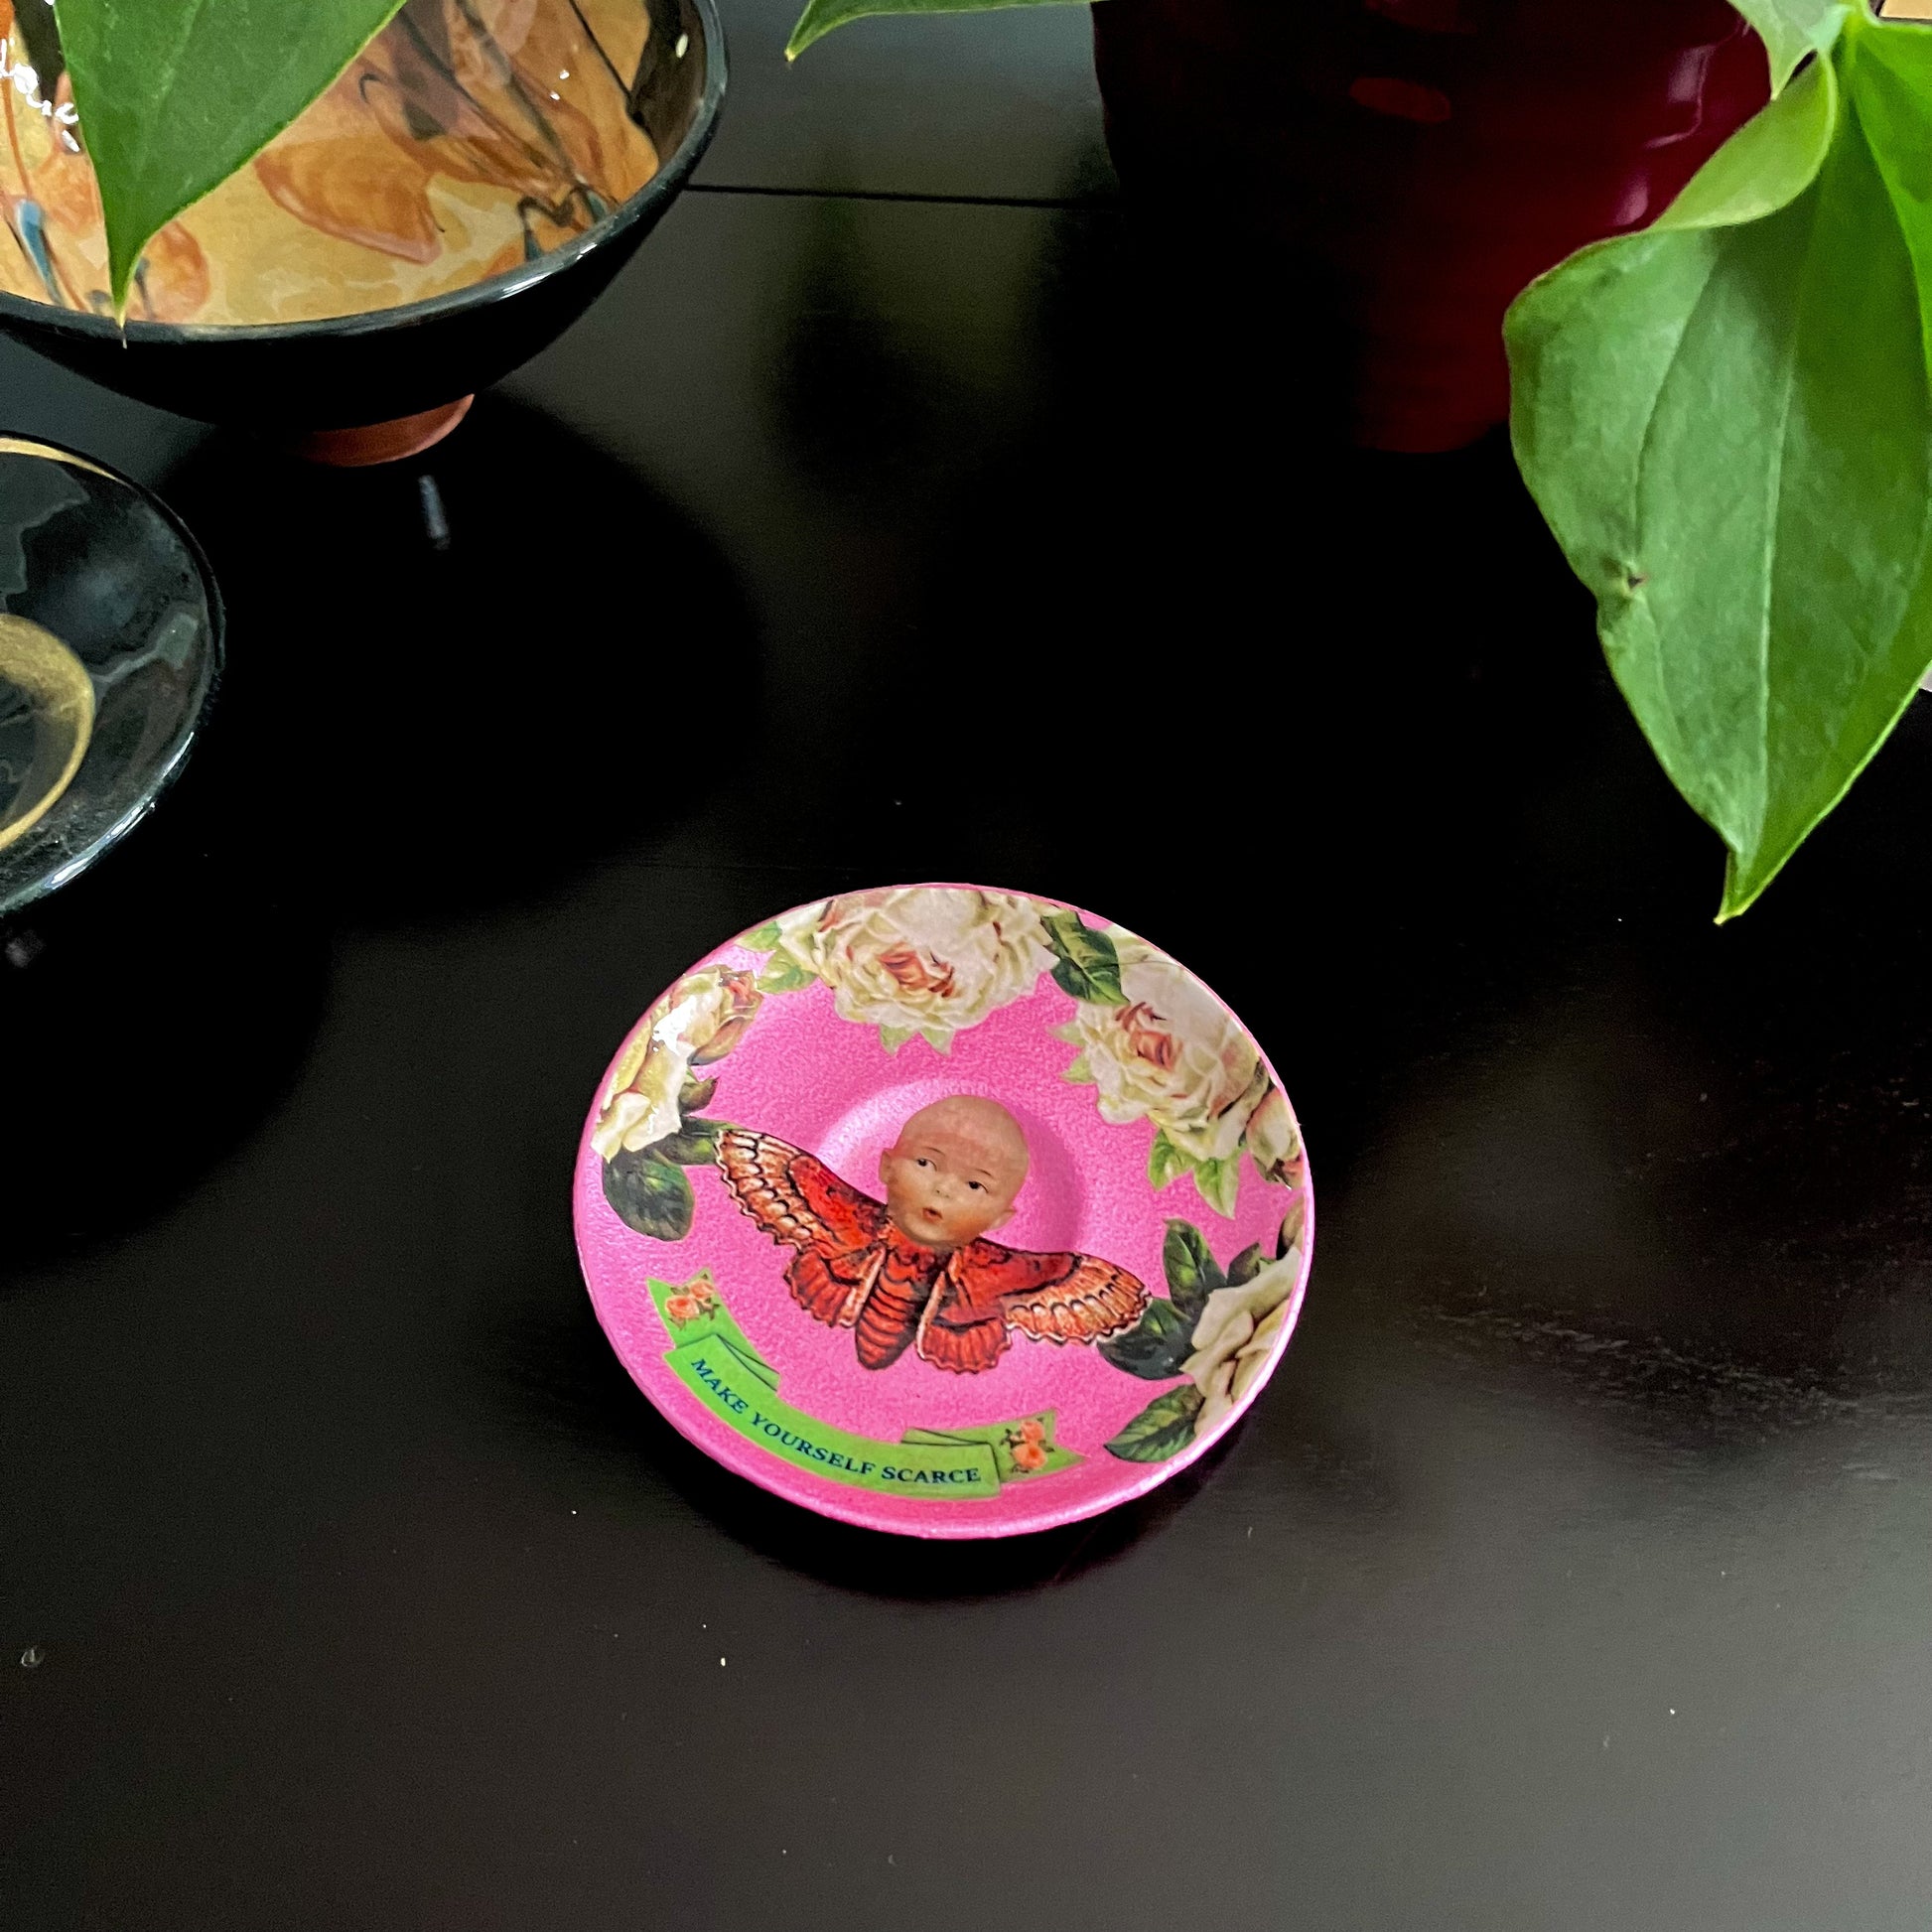 "Make Yourself Scarce" Trinket Dish by House of Frisson. Featuring a moth with doll head, framed by roses, on a pink background. Dish on a coffee table.